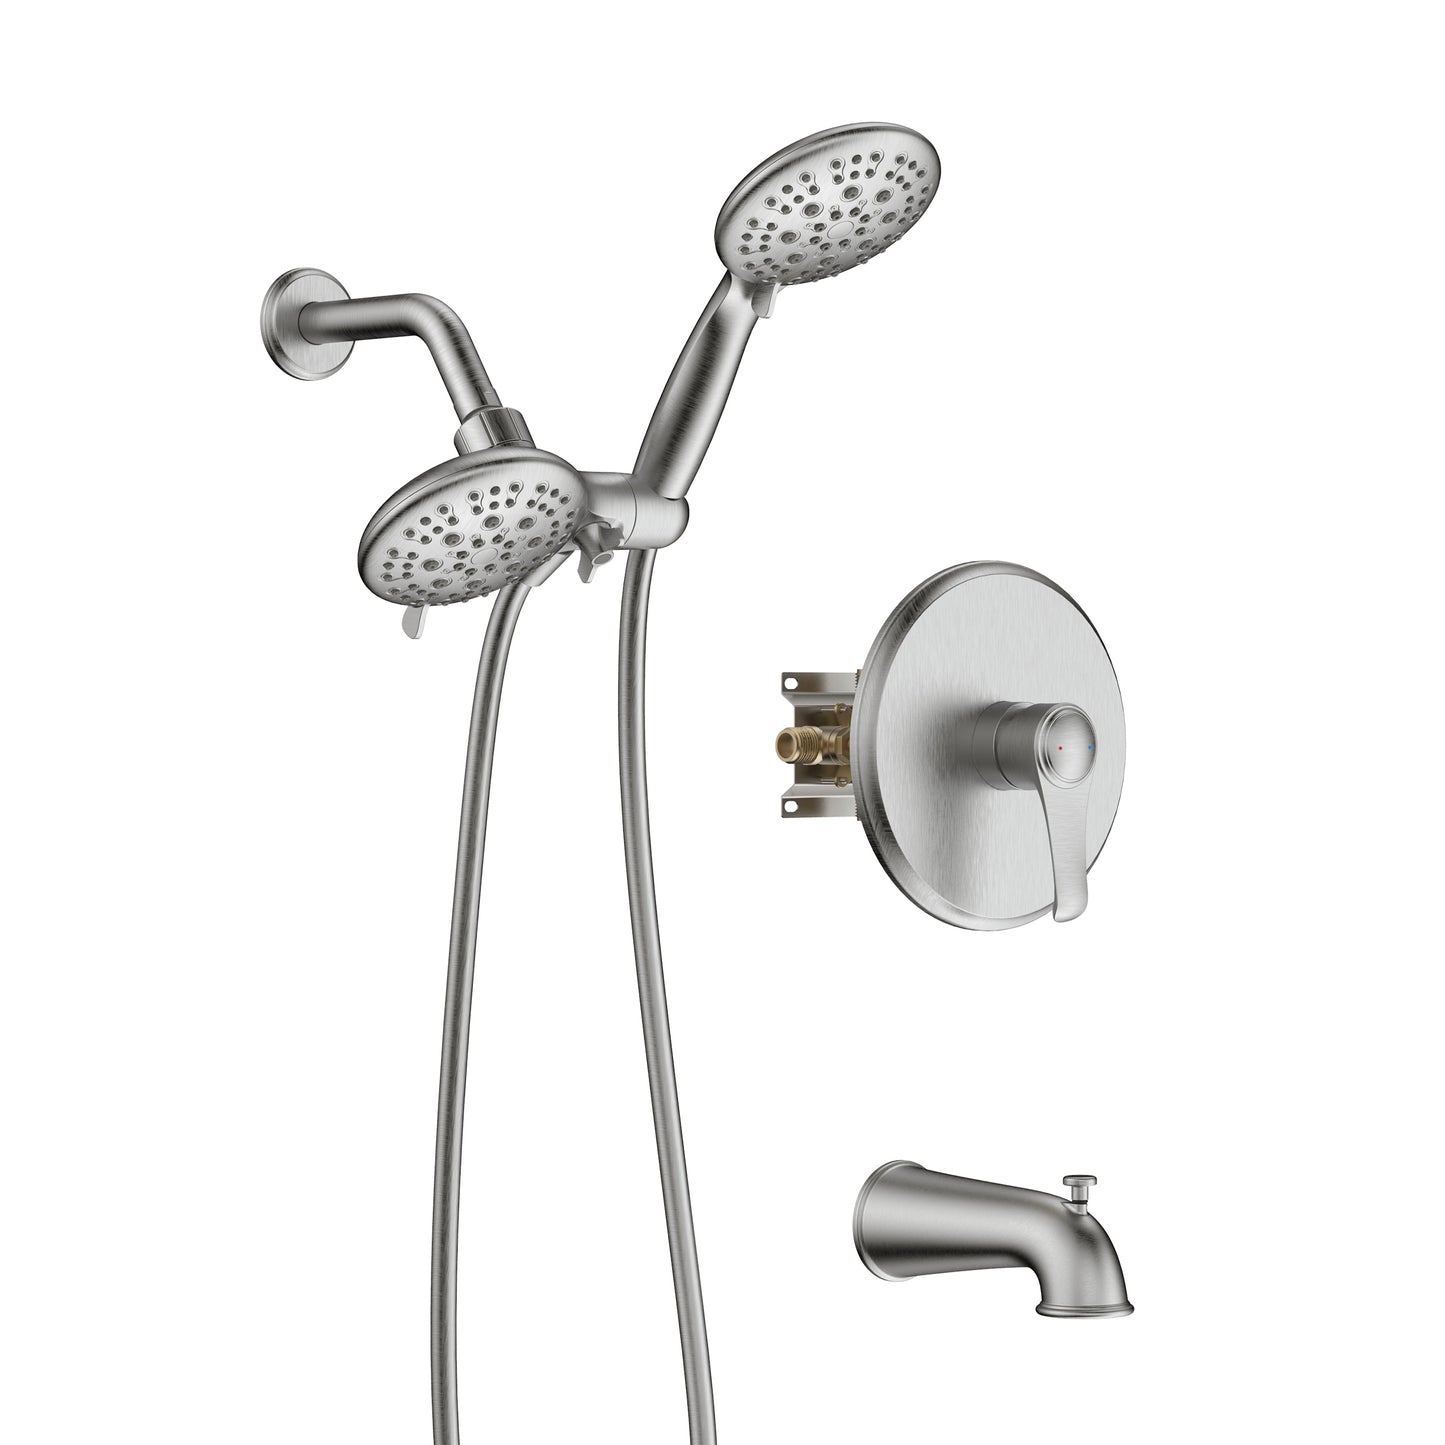 Large Amount of water Multi Function Dual Shower Head - Shower System with 4." Rain Showerhead, 6-Function Hand Shower, Under the water, Brushed Nickel